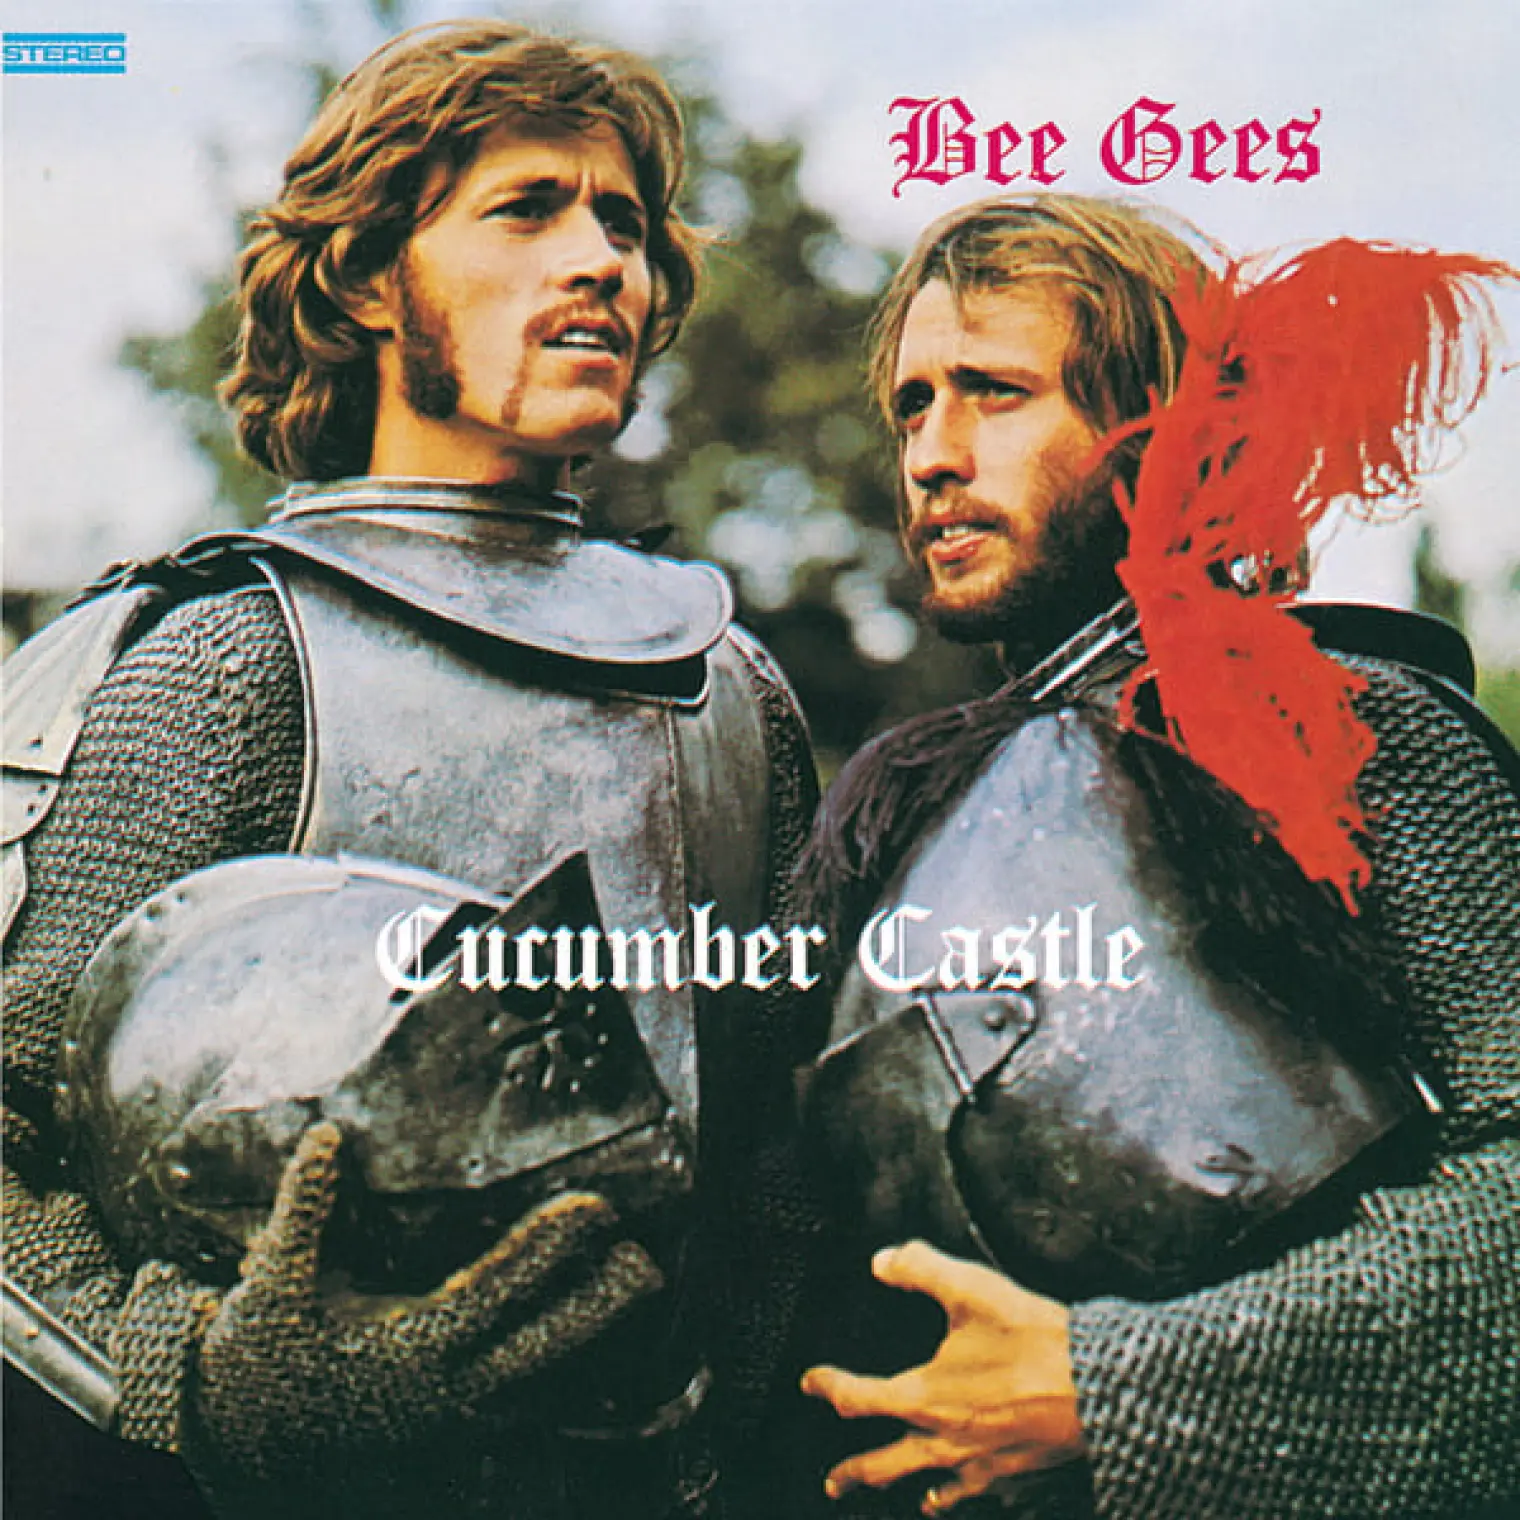 Cucumber Castle -  Bee Gees 